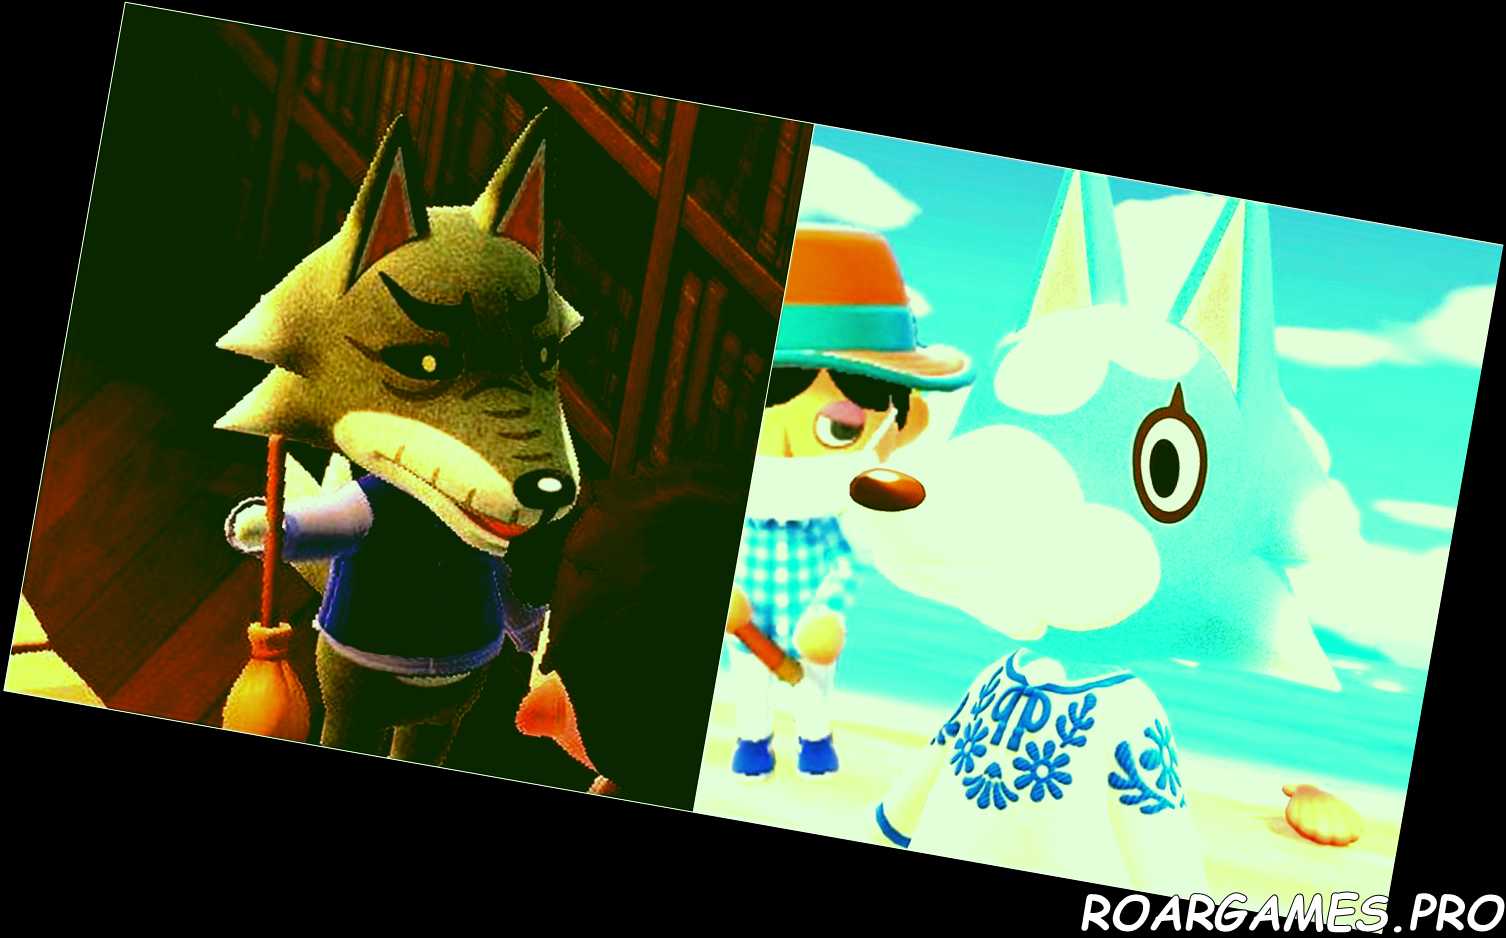 Animal Crossing wolf villagers island feature